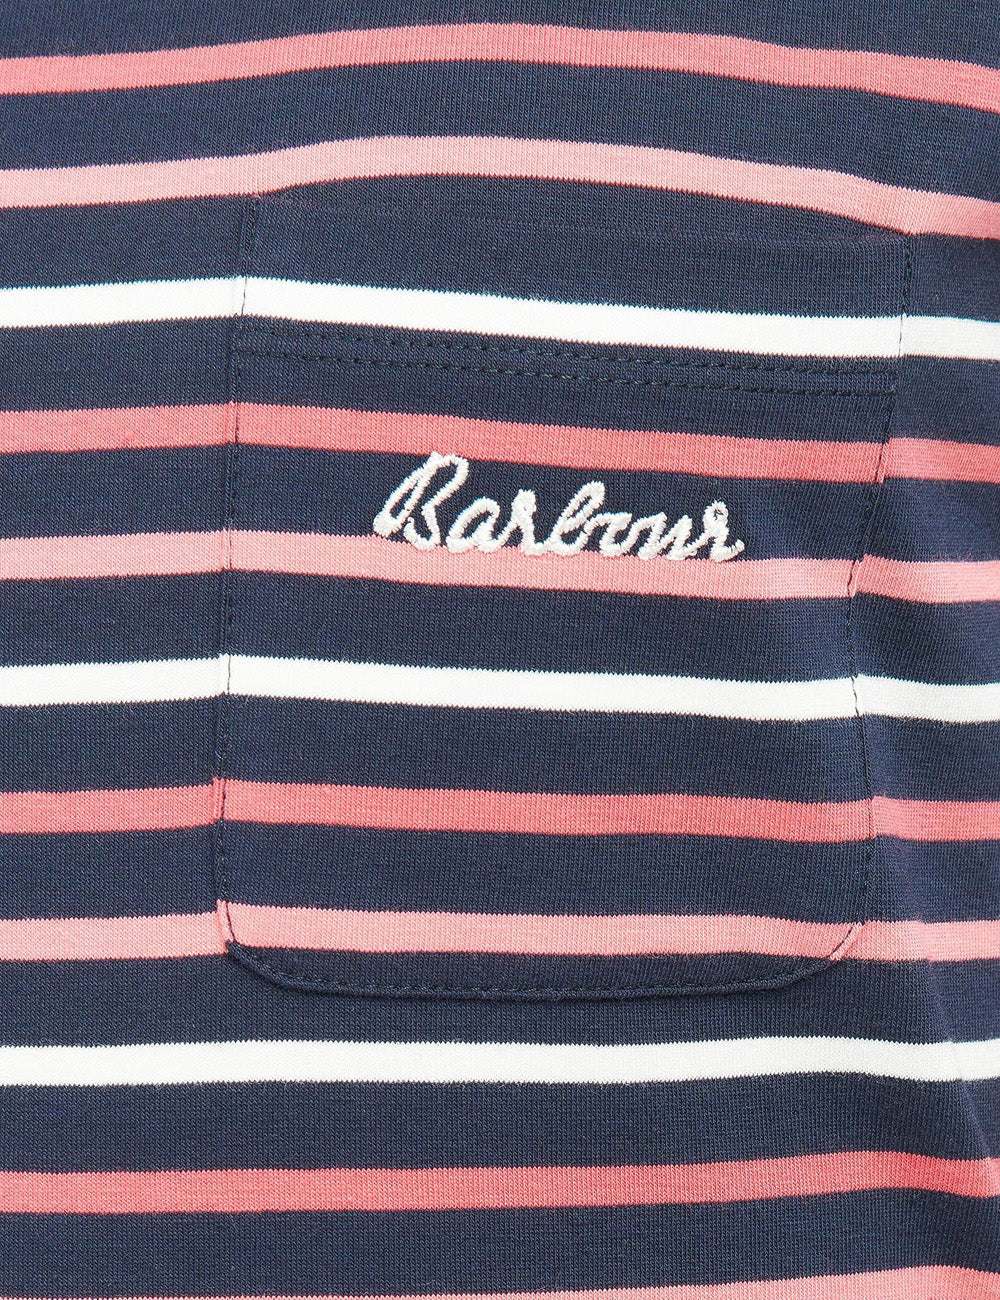 Close up of the Barbour script embroidery on the chest patch pocket of the dress